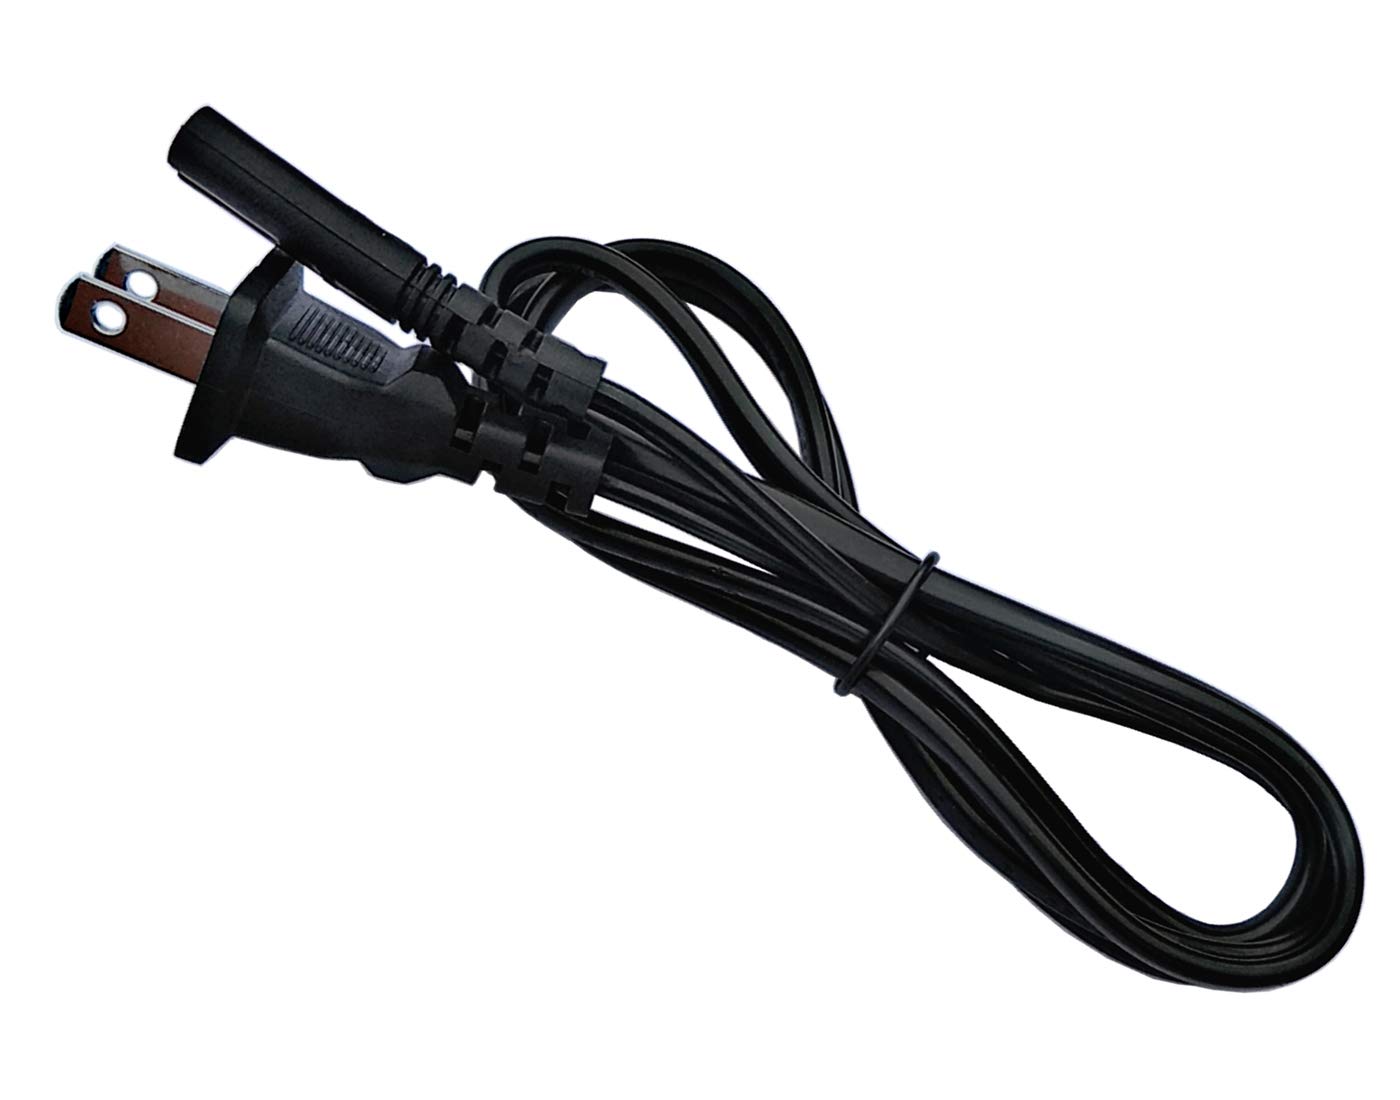 UpBright AC In Power Cord Cable Compatible with Pyle Audio PMBSPG40 PSUFM1043BT PYLE-PRO PSUFM1235BT BoomBox Speaker Meirende MR-108 Karaoke PA PSBV600BT PSBV630HDBT PWMA170 PWMA850UFM PWMAB2 PWMAB250